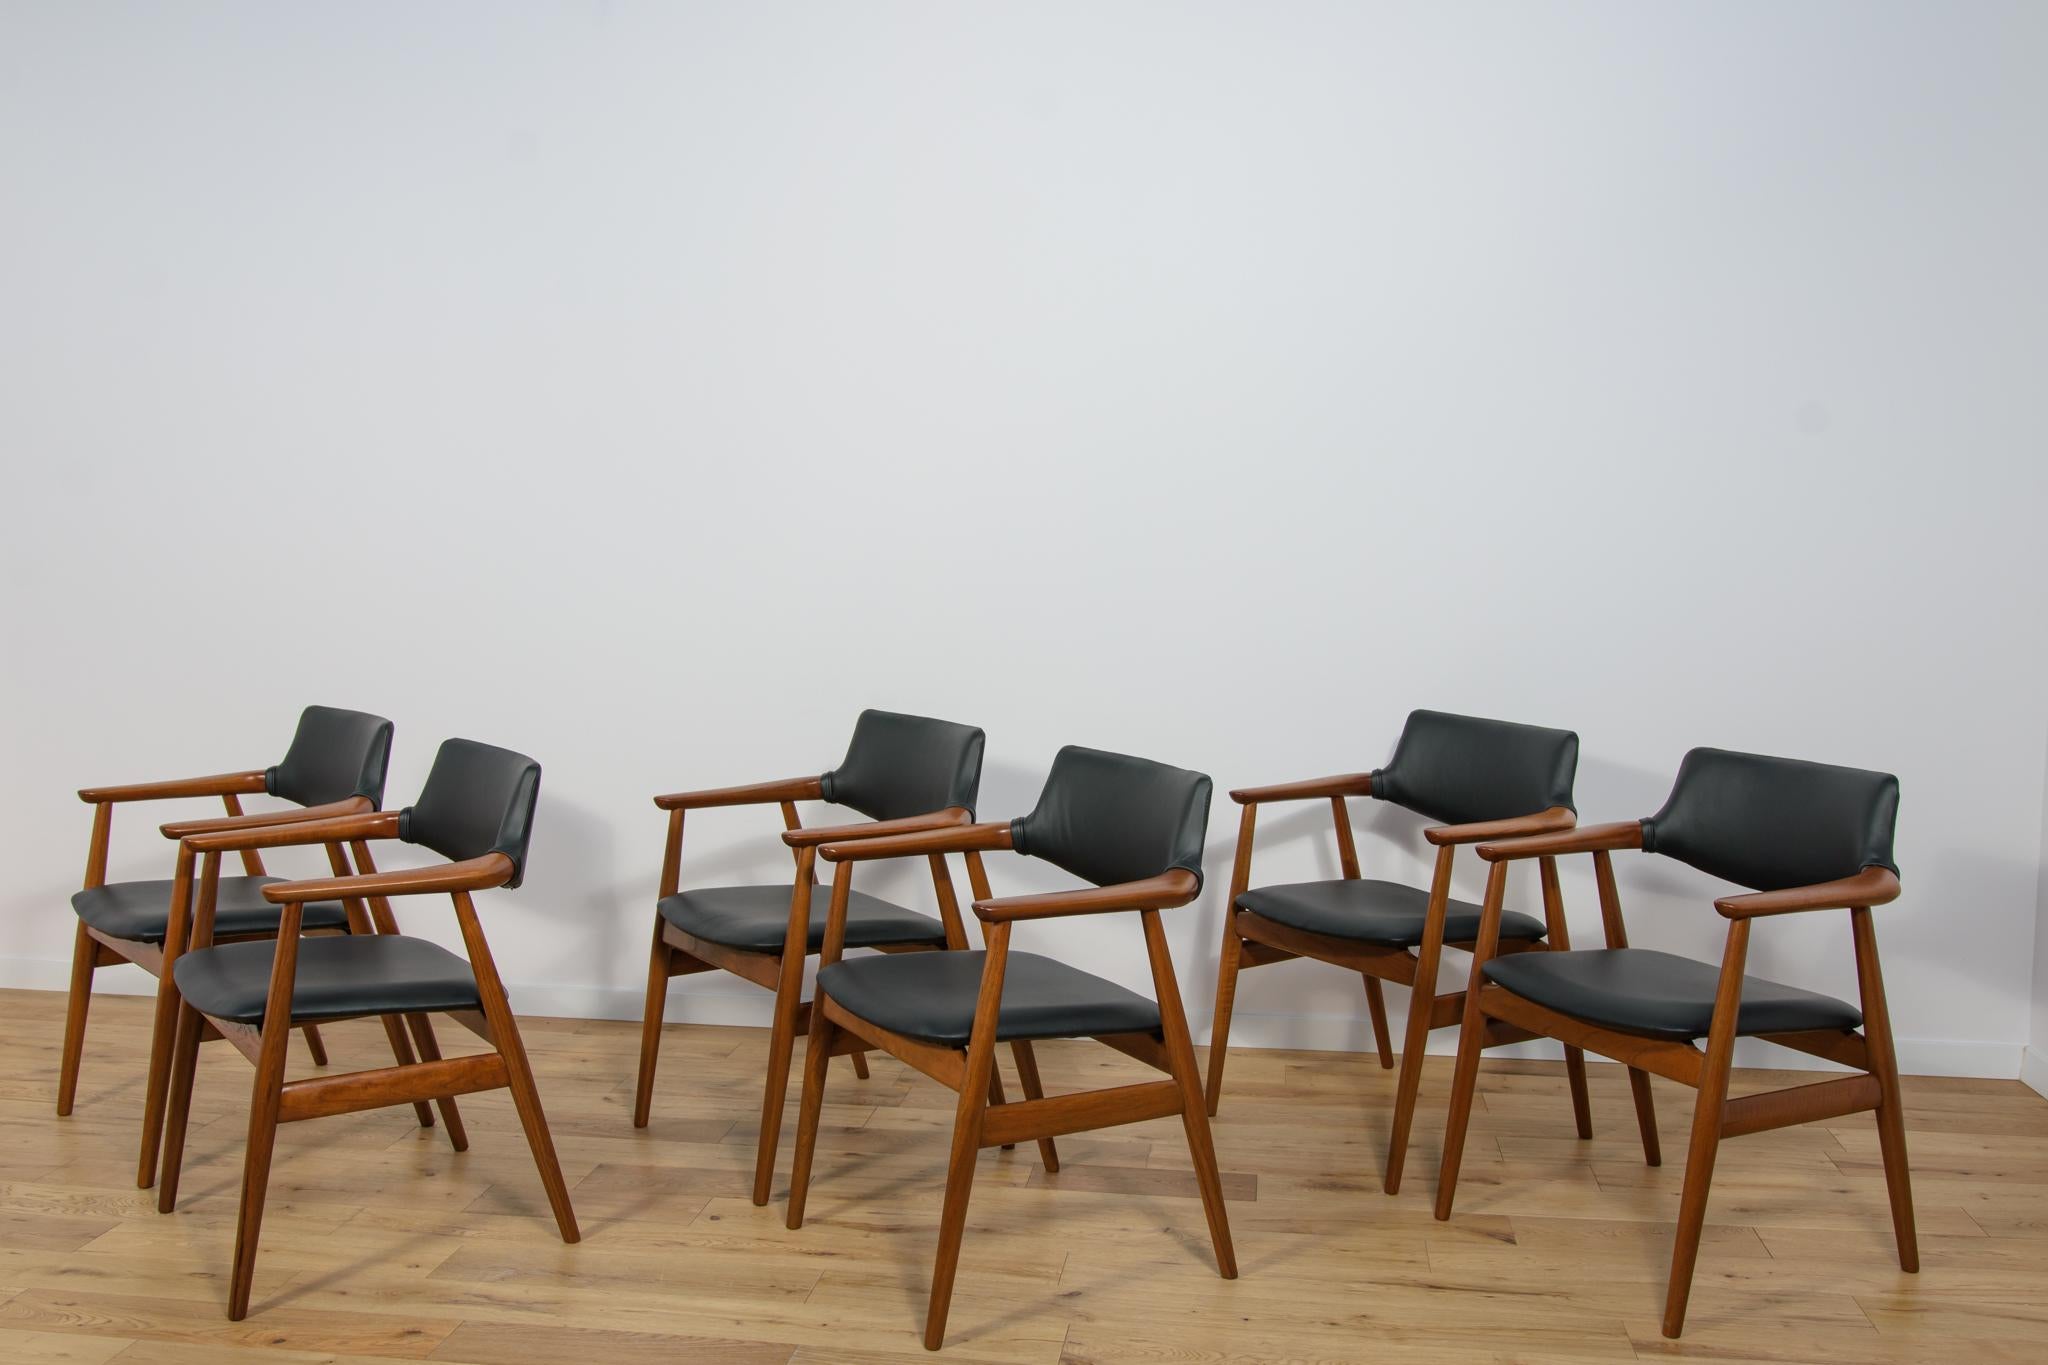 Danish Mid century Teak Dining Chairs Model GM11 by Svend Åge Eriksen for Glostrup. For Sale